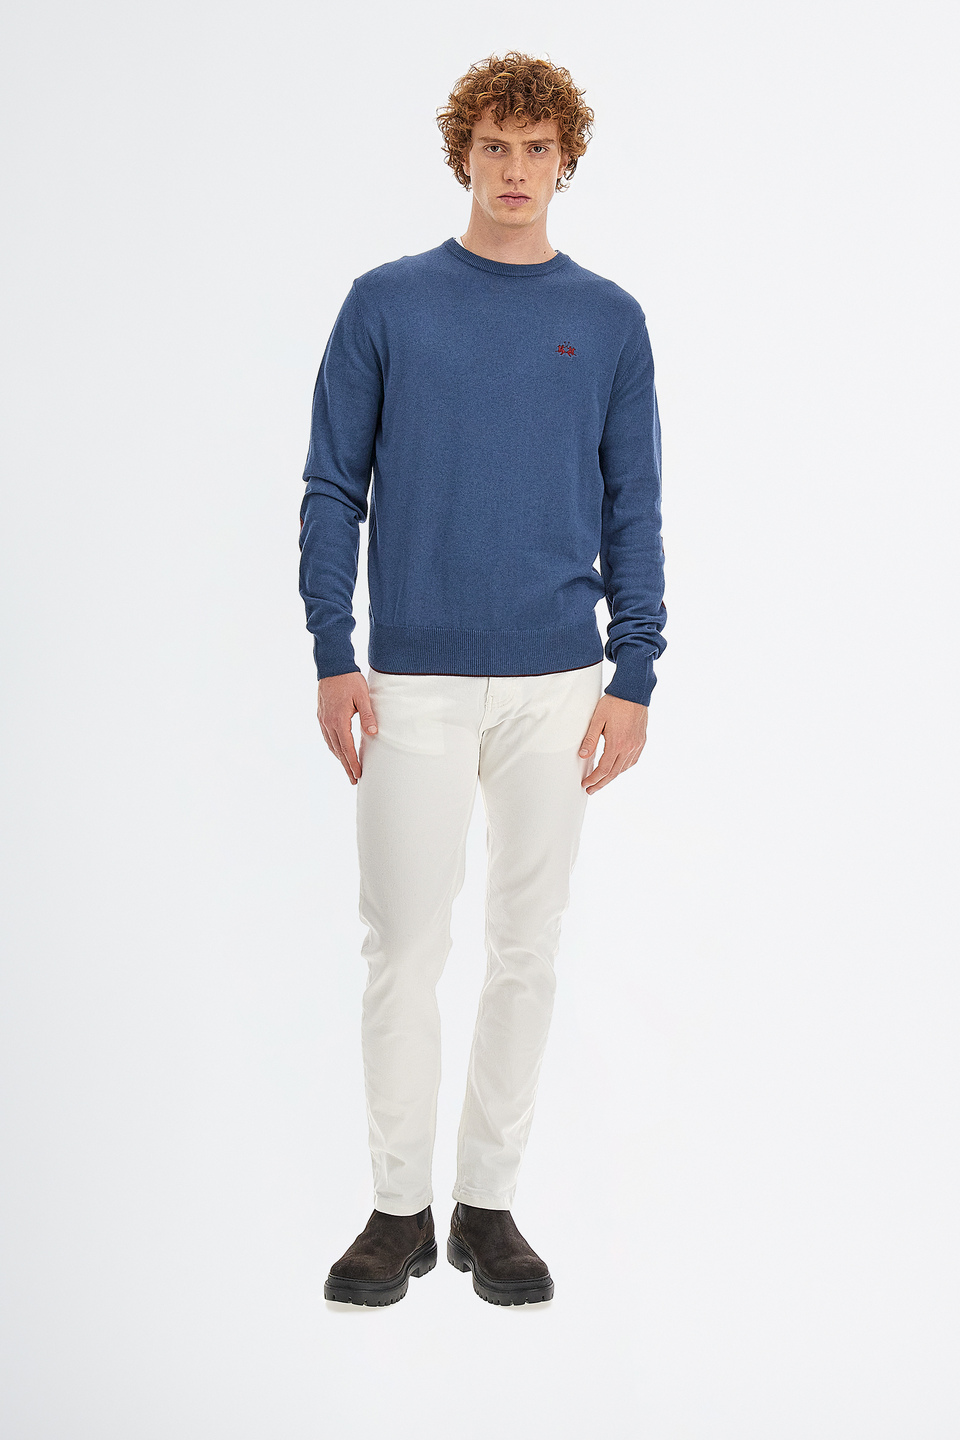 Men’s trousers in stretch cotton regular fit chino model | La Martina - Official Online Shop